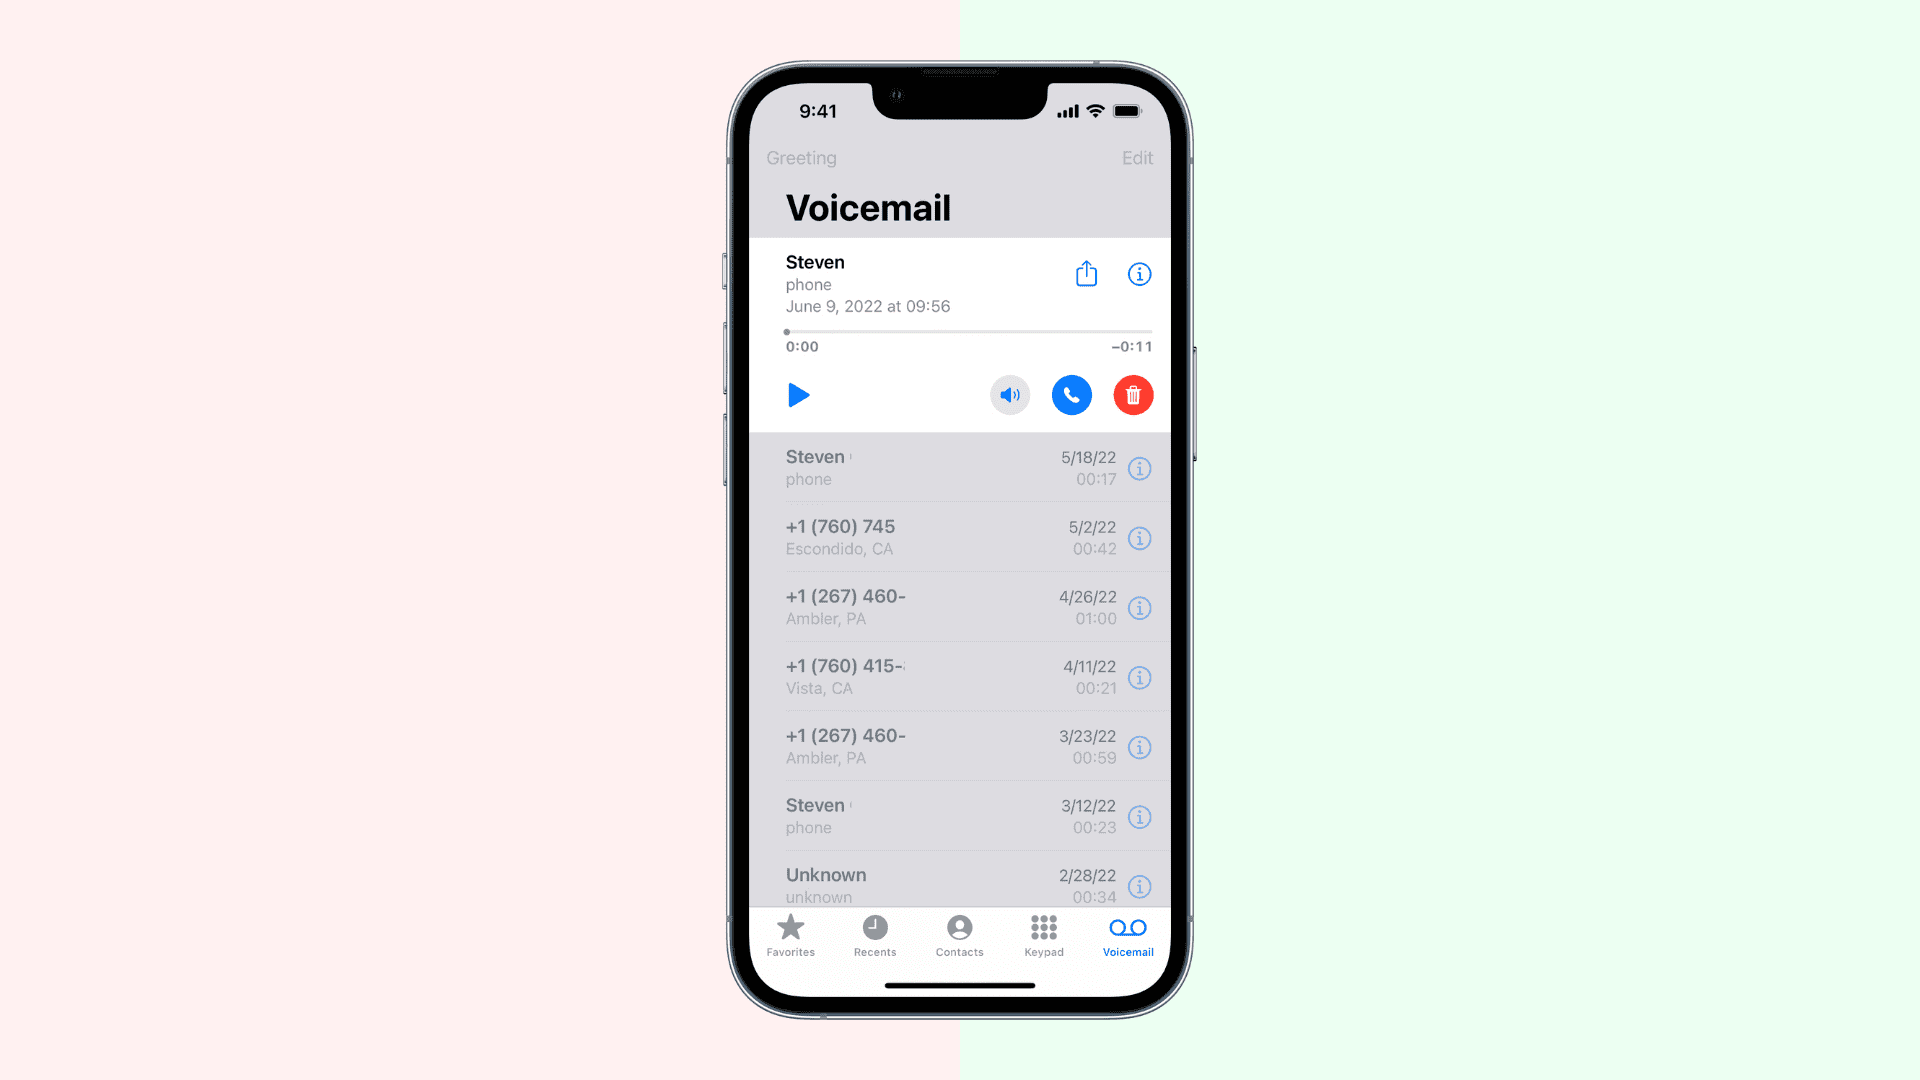 Voicemail screen on iPhone